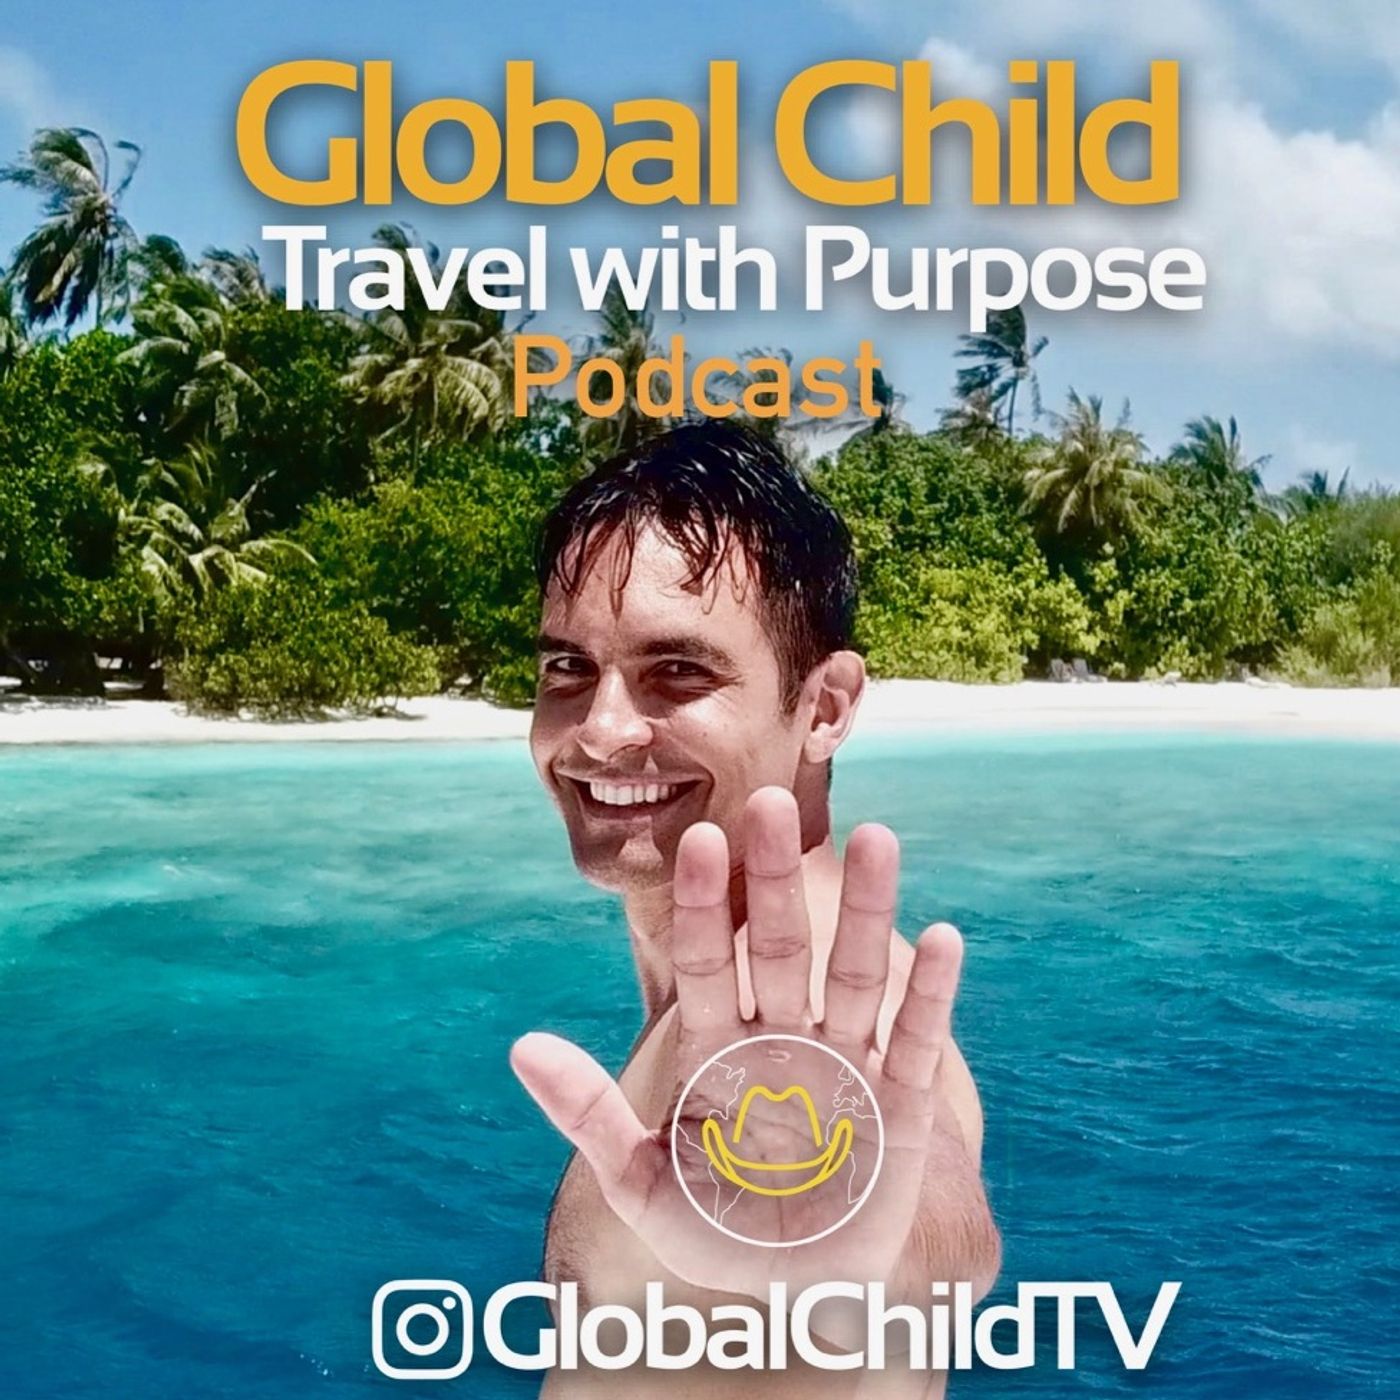 Global Child “Travel with Purpose”